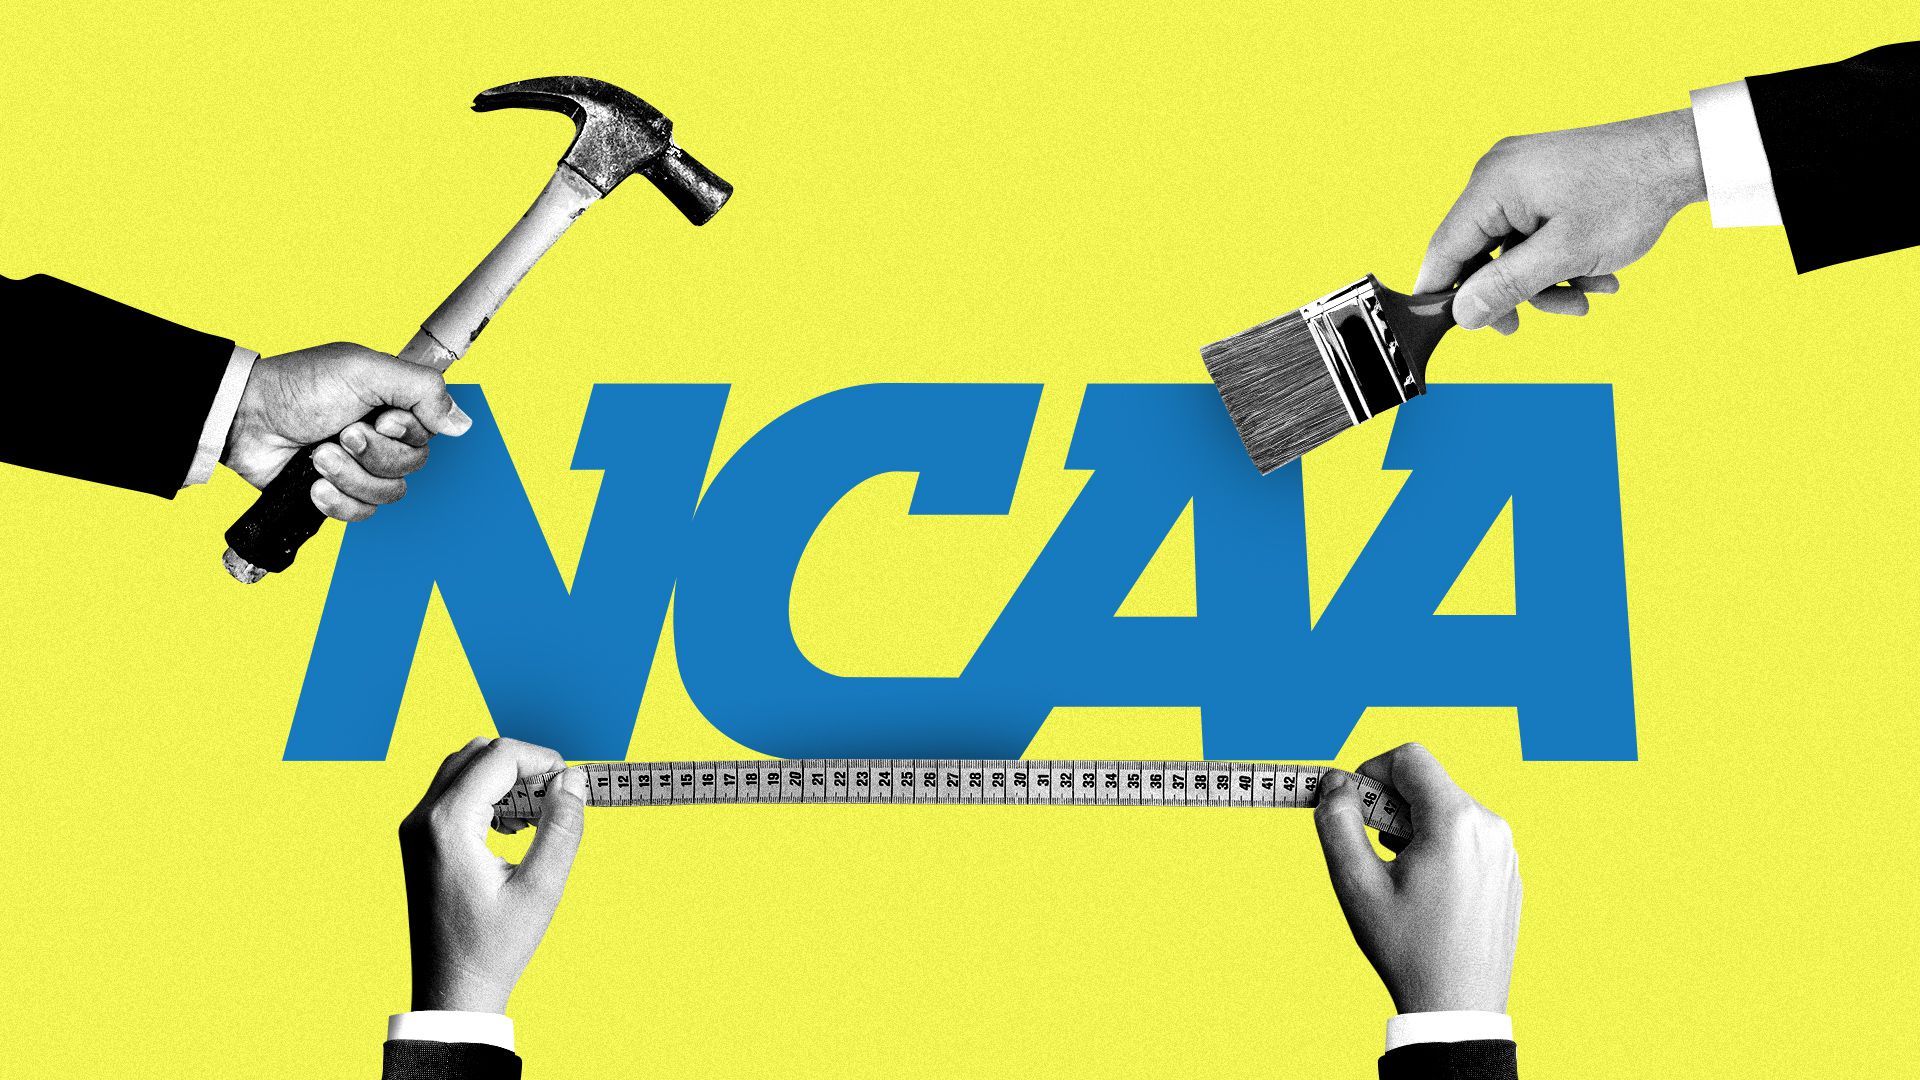 Illustration of hands holding a paintbrush, hammer, and measuring tape up against the NCAA logo. 